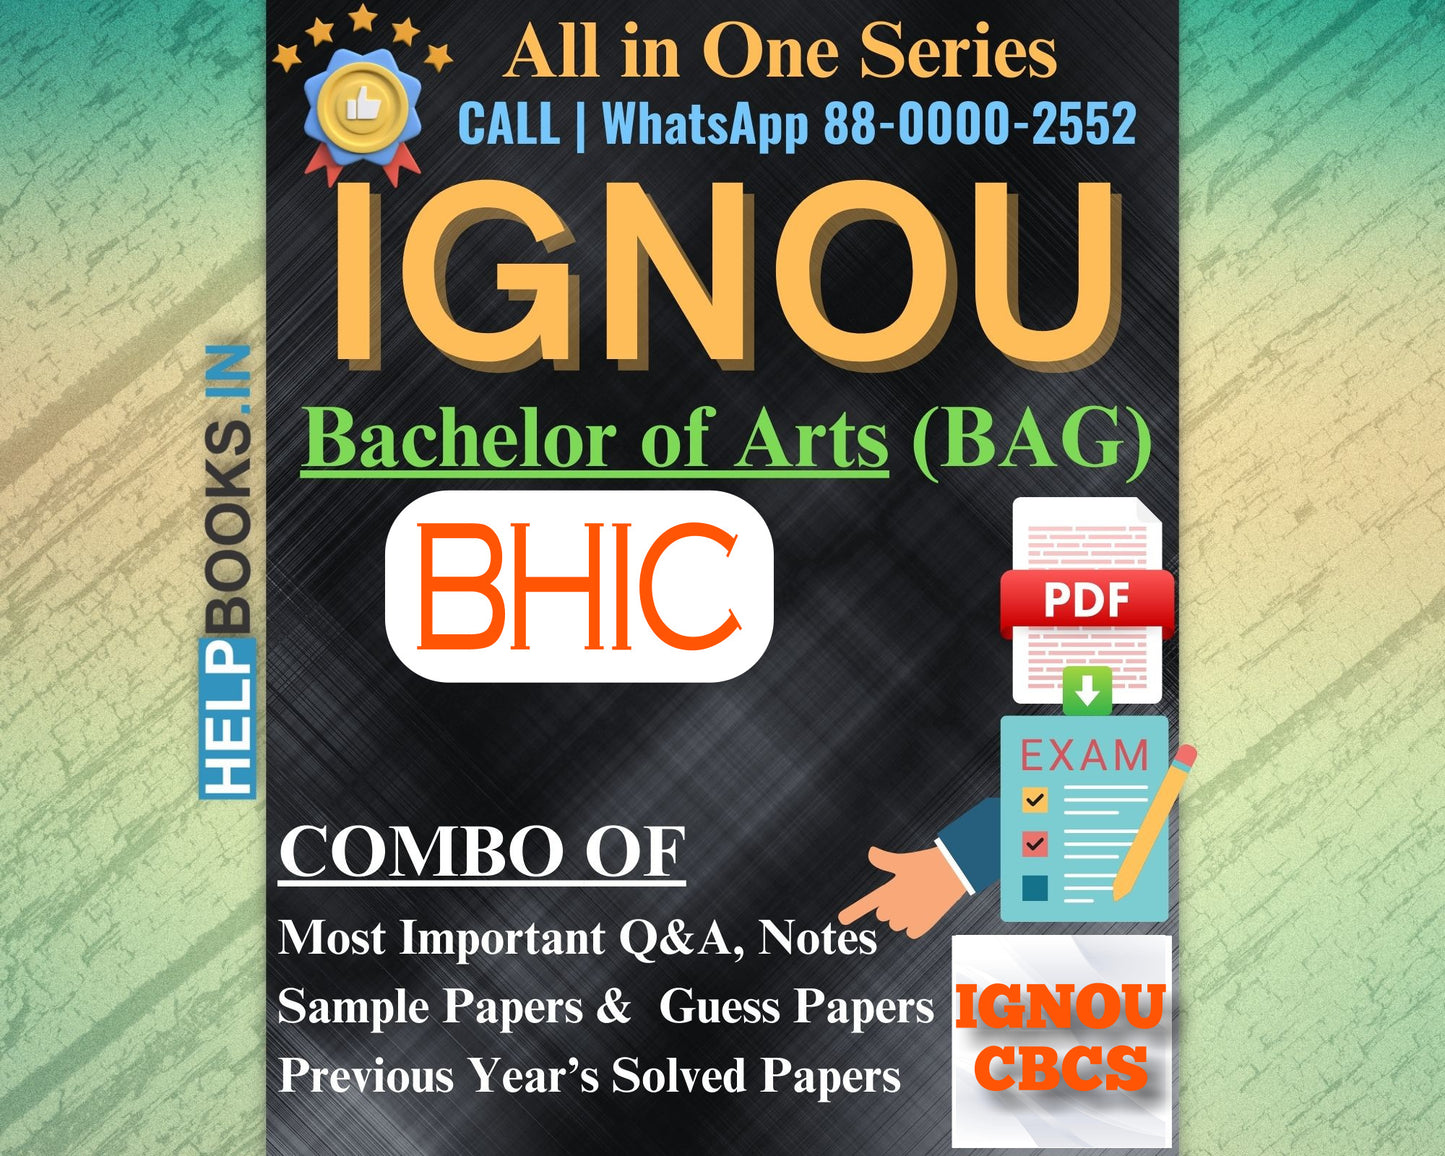 IGNOU BAG Online Study Package: Bachelor of Arts (BA) - Previous Years Solved Papers, Q&A, Exam Notes, Sample Papers, Guess Papers-BHIC131, BHIC132, BHIC133, BHIC134